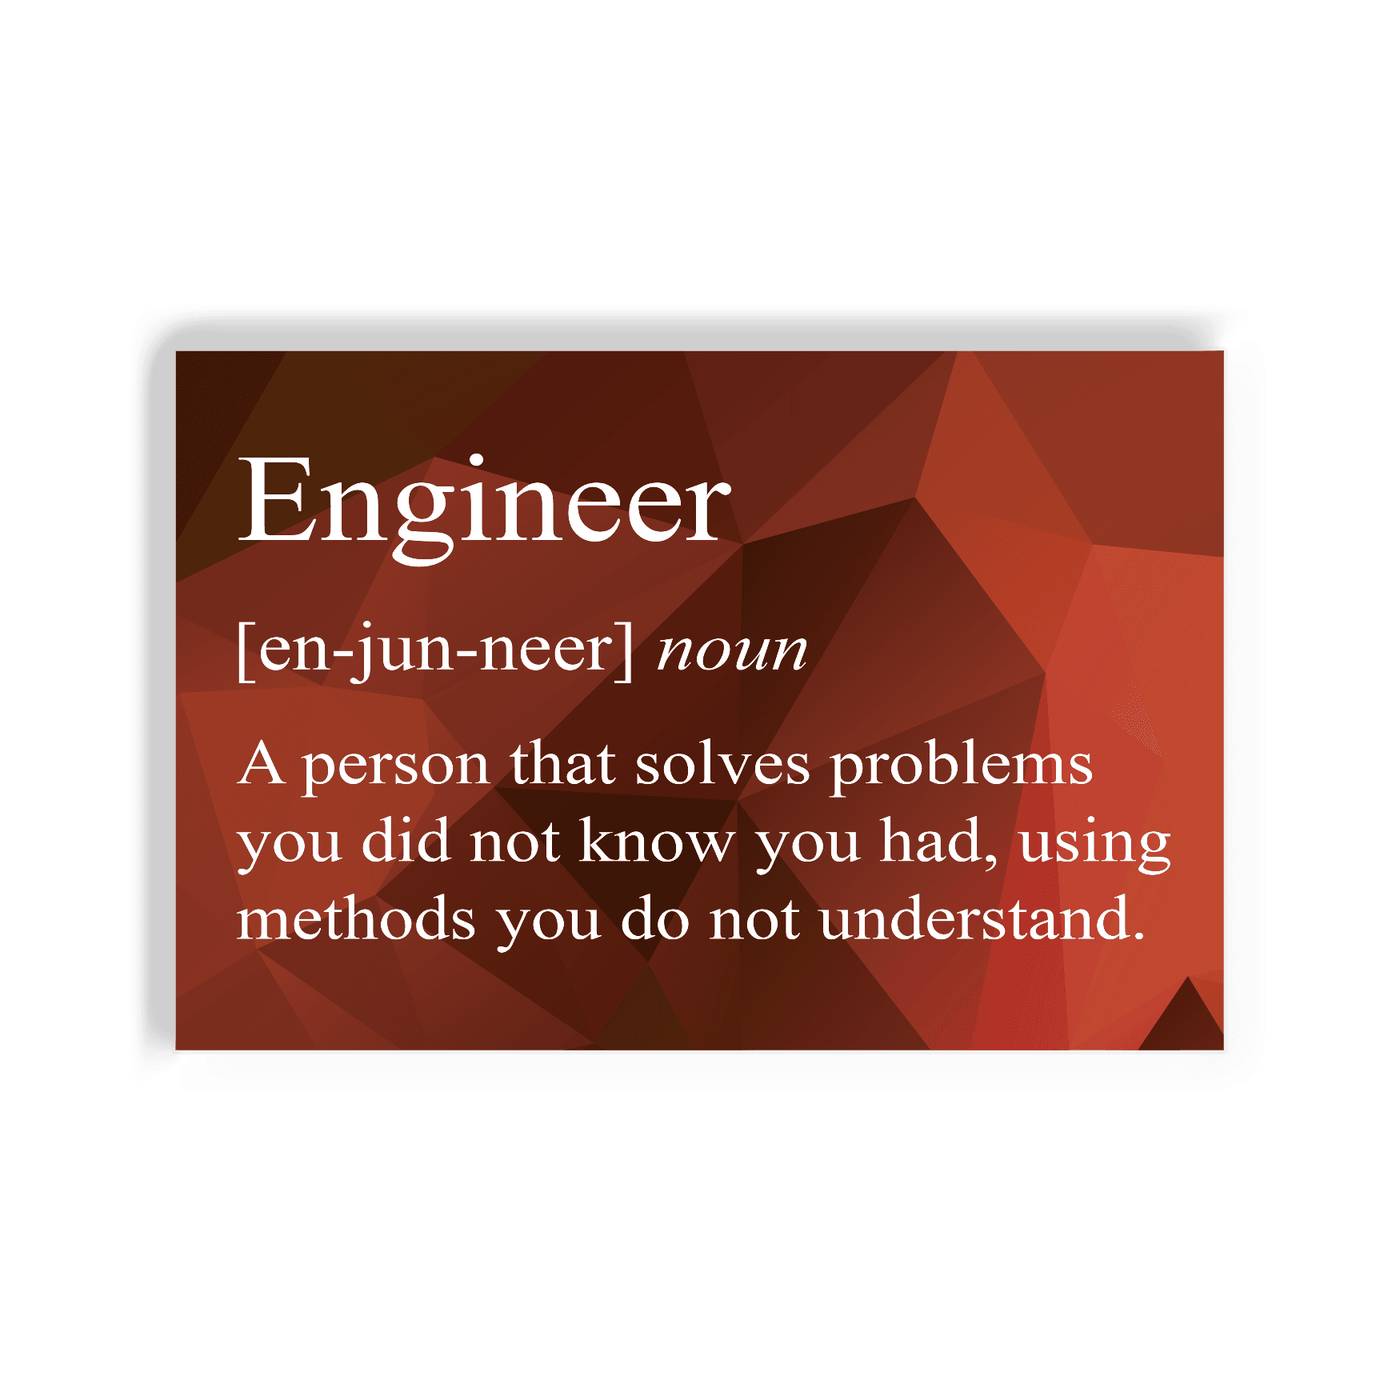 2x3 colorful magnet with image of triangles with text that snarkily explains the definition of an engineer